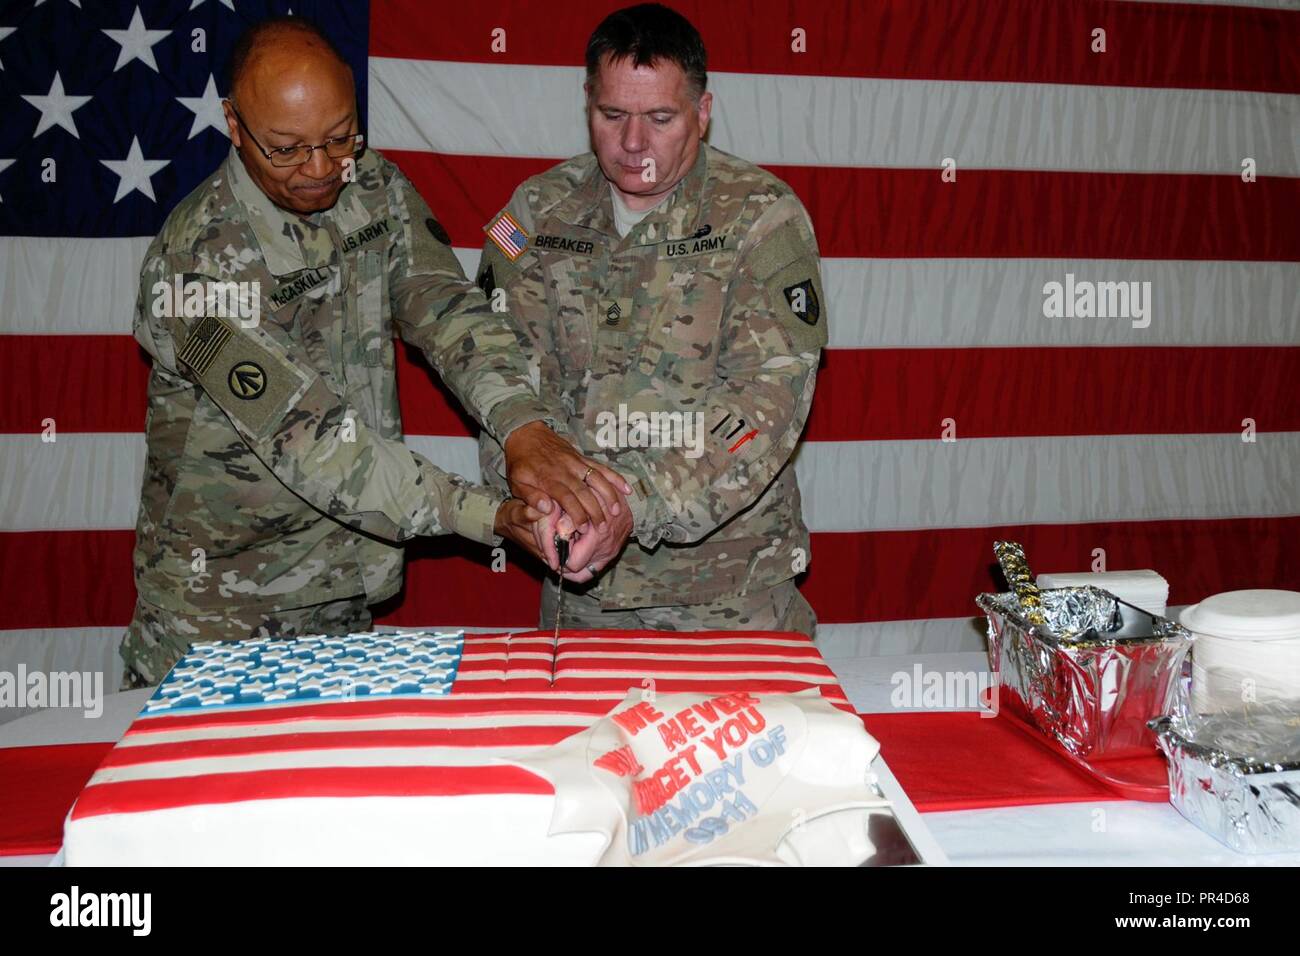 U.S. Army Chaplain Lt. Col. Henry McCaskill Jr., left, and U.S. Army Master Sgt. Brian Breaker cut a cake during a 9/11 memorial event at Mihail Kogalniceanu Air Base in Romania, Sept. 11, 2018.  The event honored the 2,996 lives taken during the attack on the World Trade Center and the Pentagon 17 years ago. Stock Photo